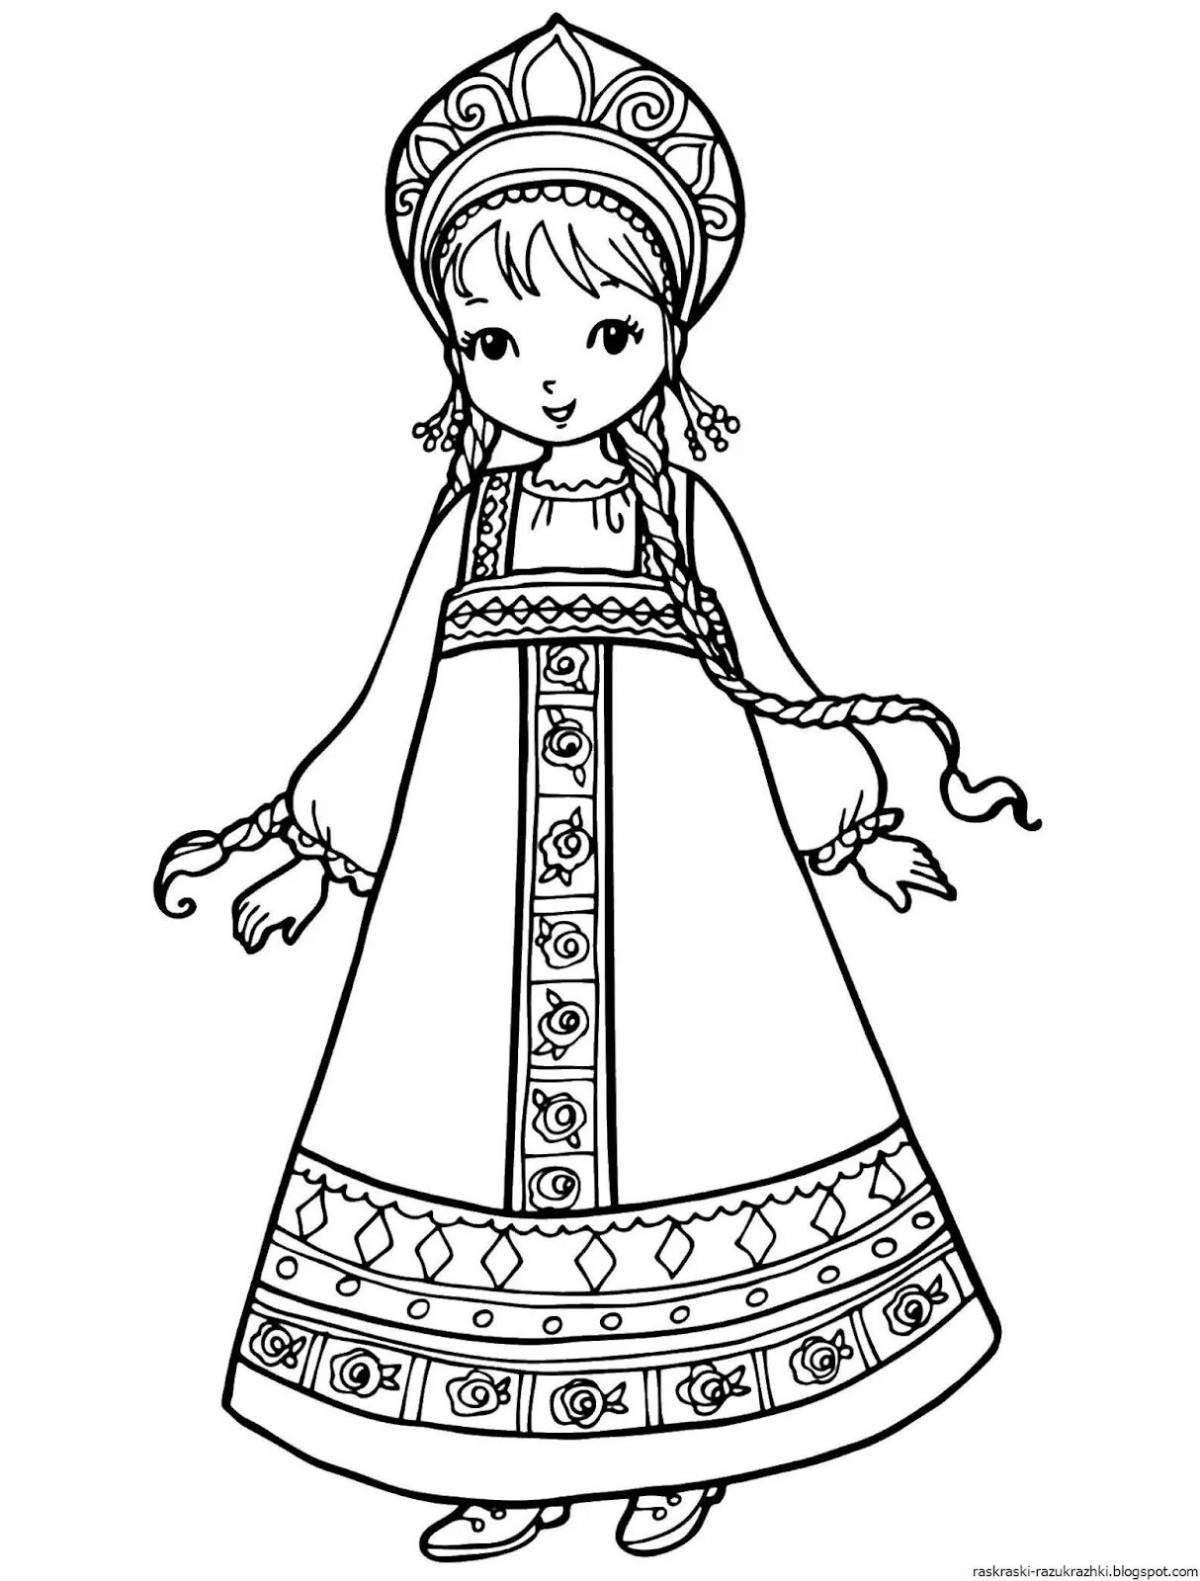 Fun coloring pages in folk costumes for children